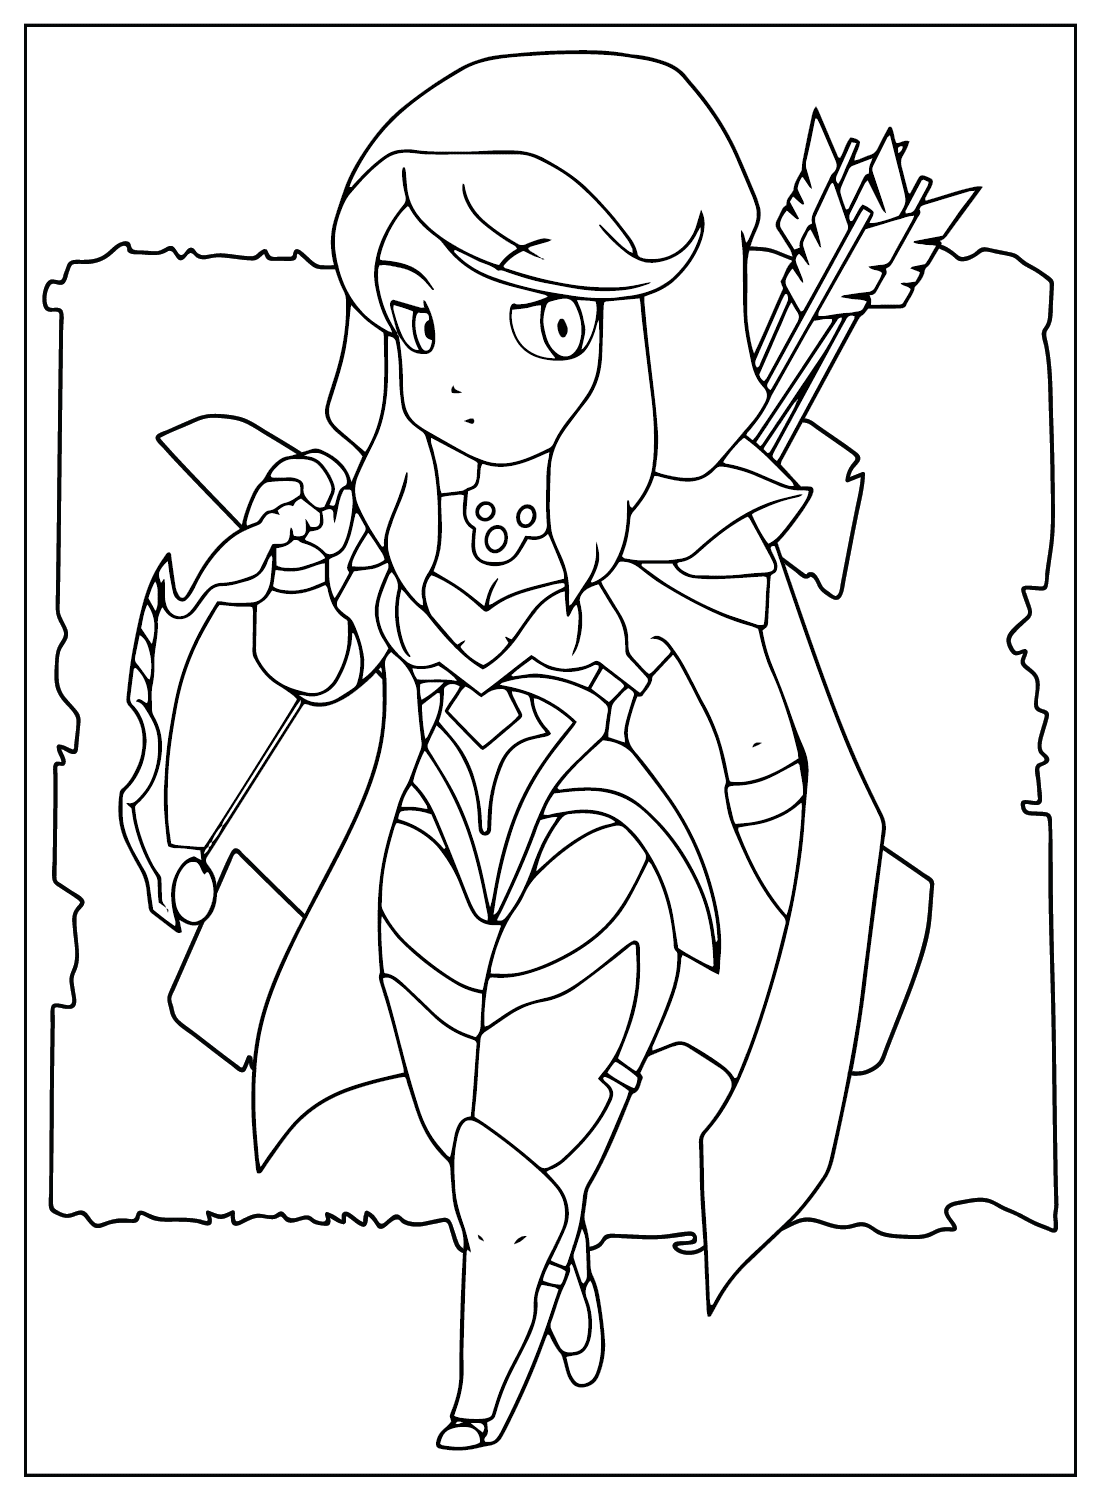 Drow Ranger Coloring Page from Dota 2